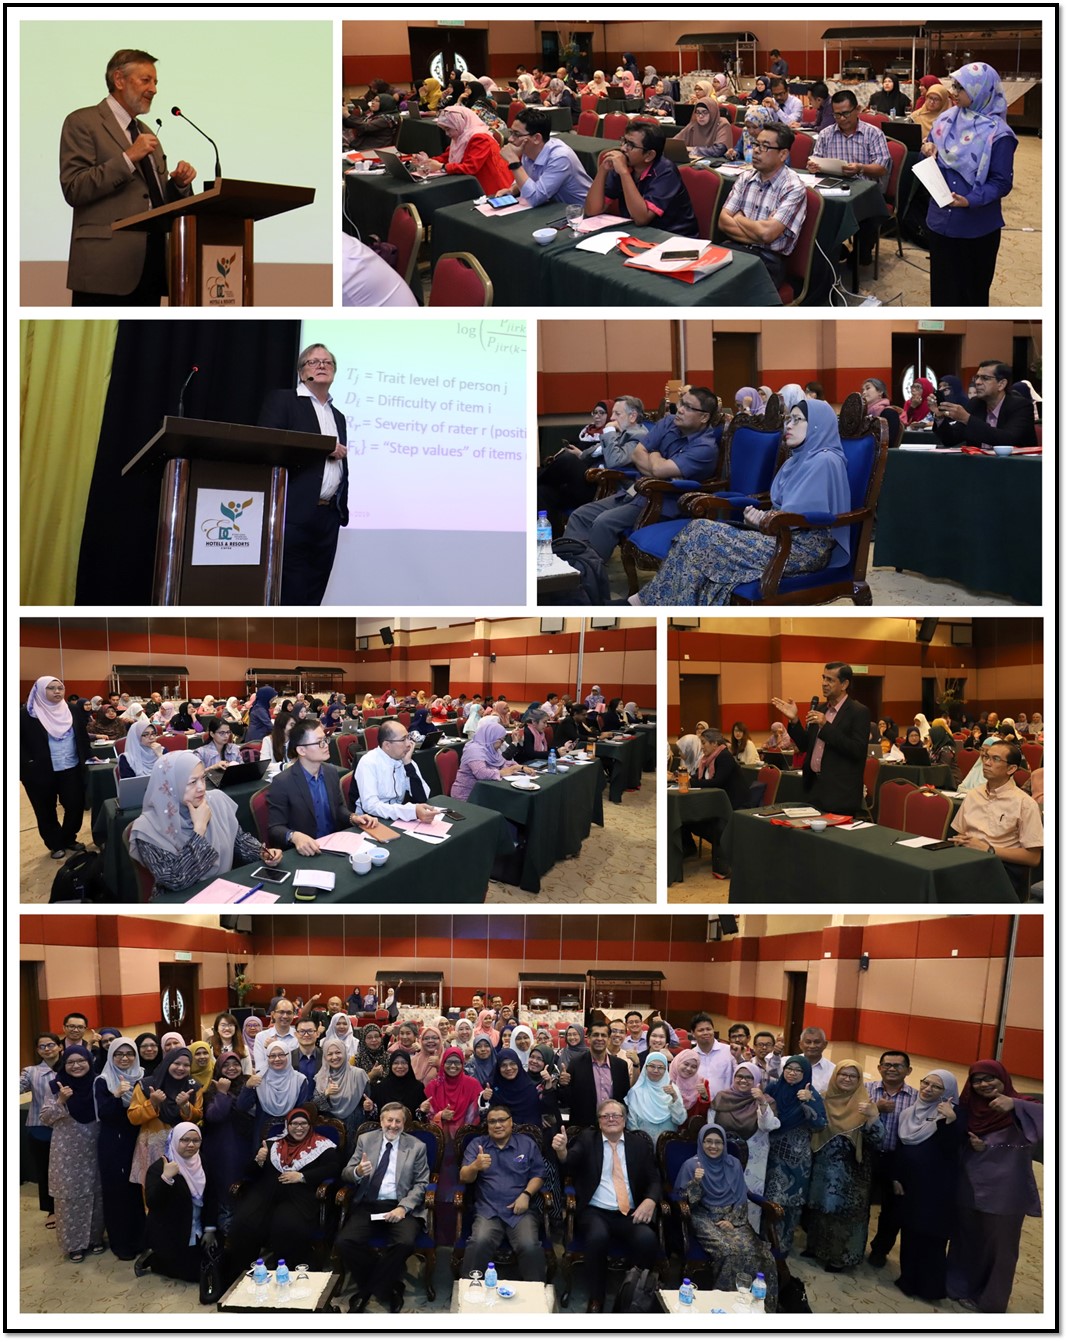 FOREIGN EXPERTS SHARE EXPERTISE AND EXPERIENCES IN THE FIELD OF ASSESSMENT WITH UUM ACADEMICIANS